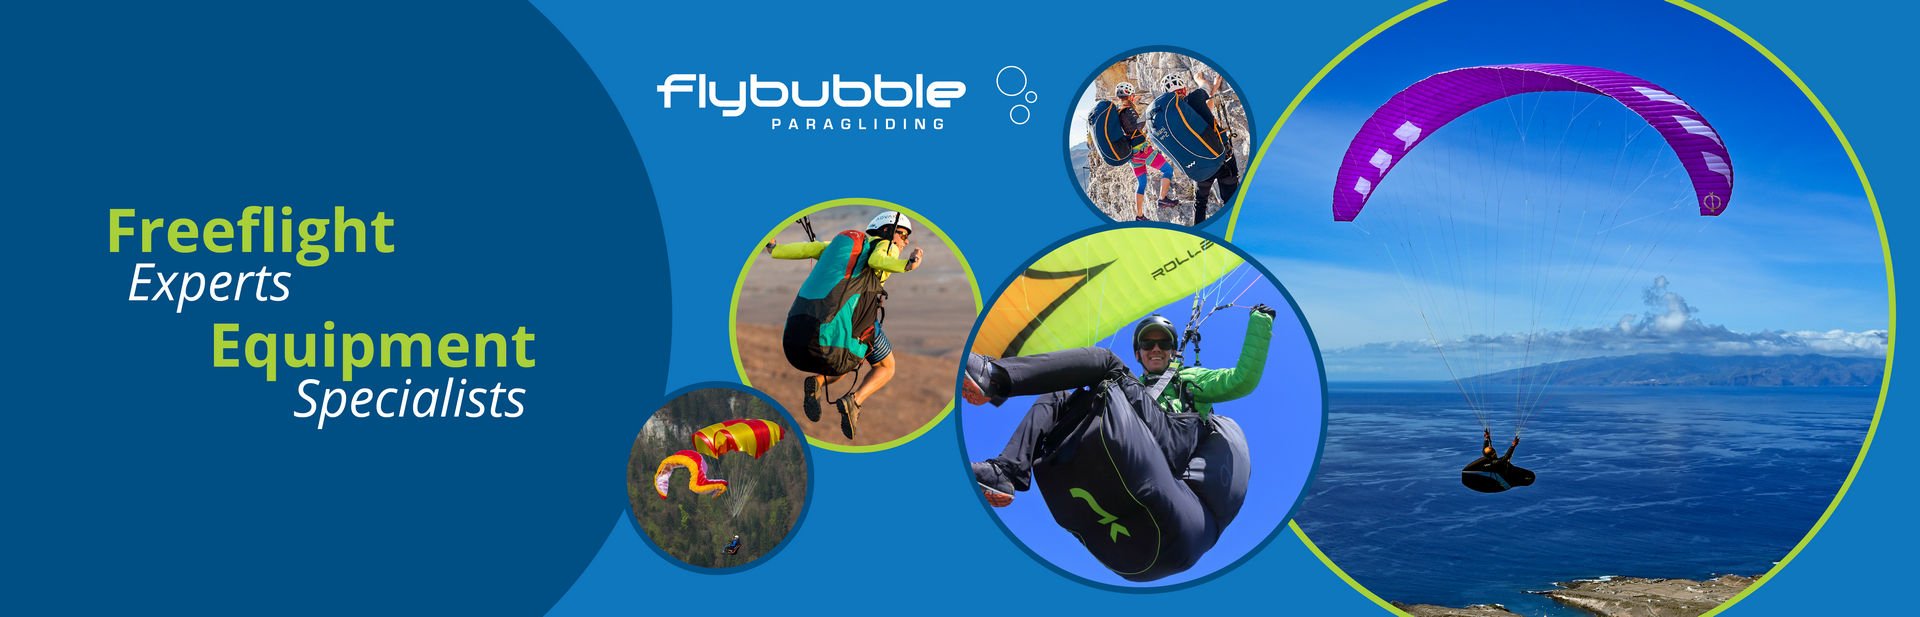 Flybubble - Your paragliding freeflight experts. Equipment specialists.